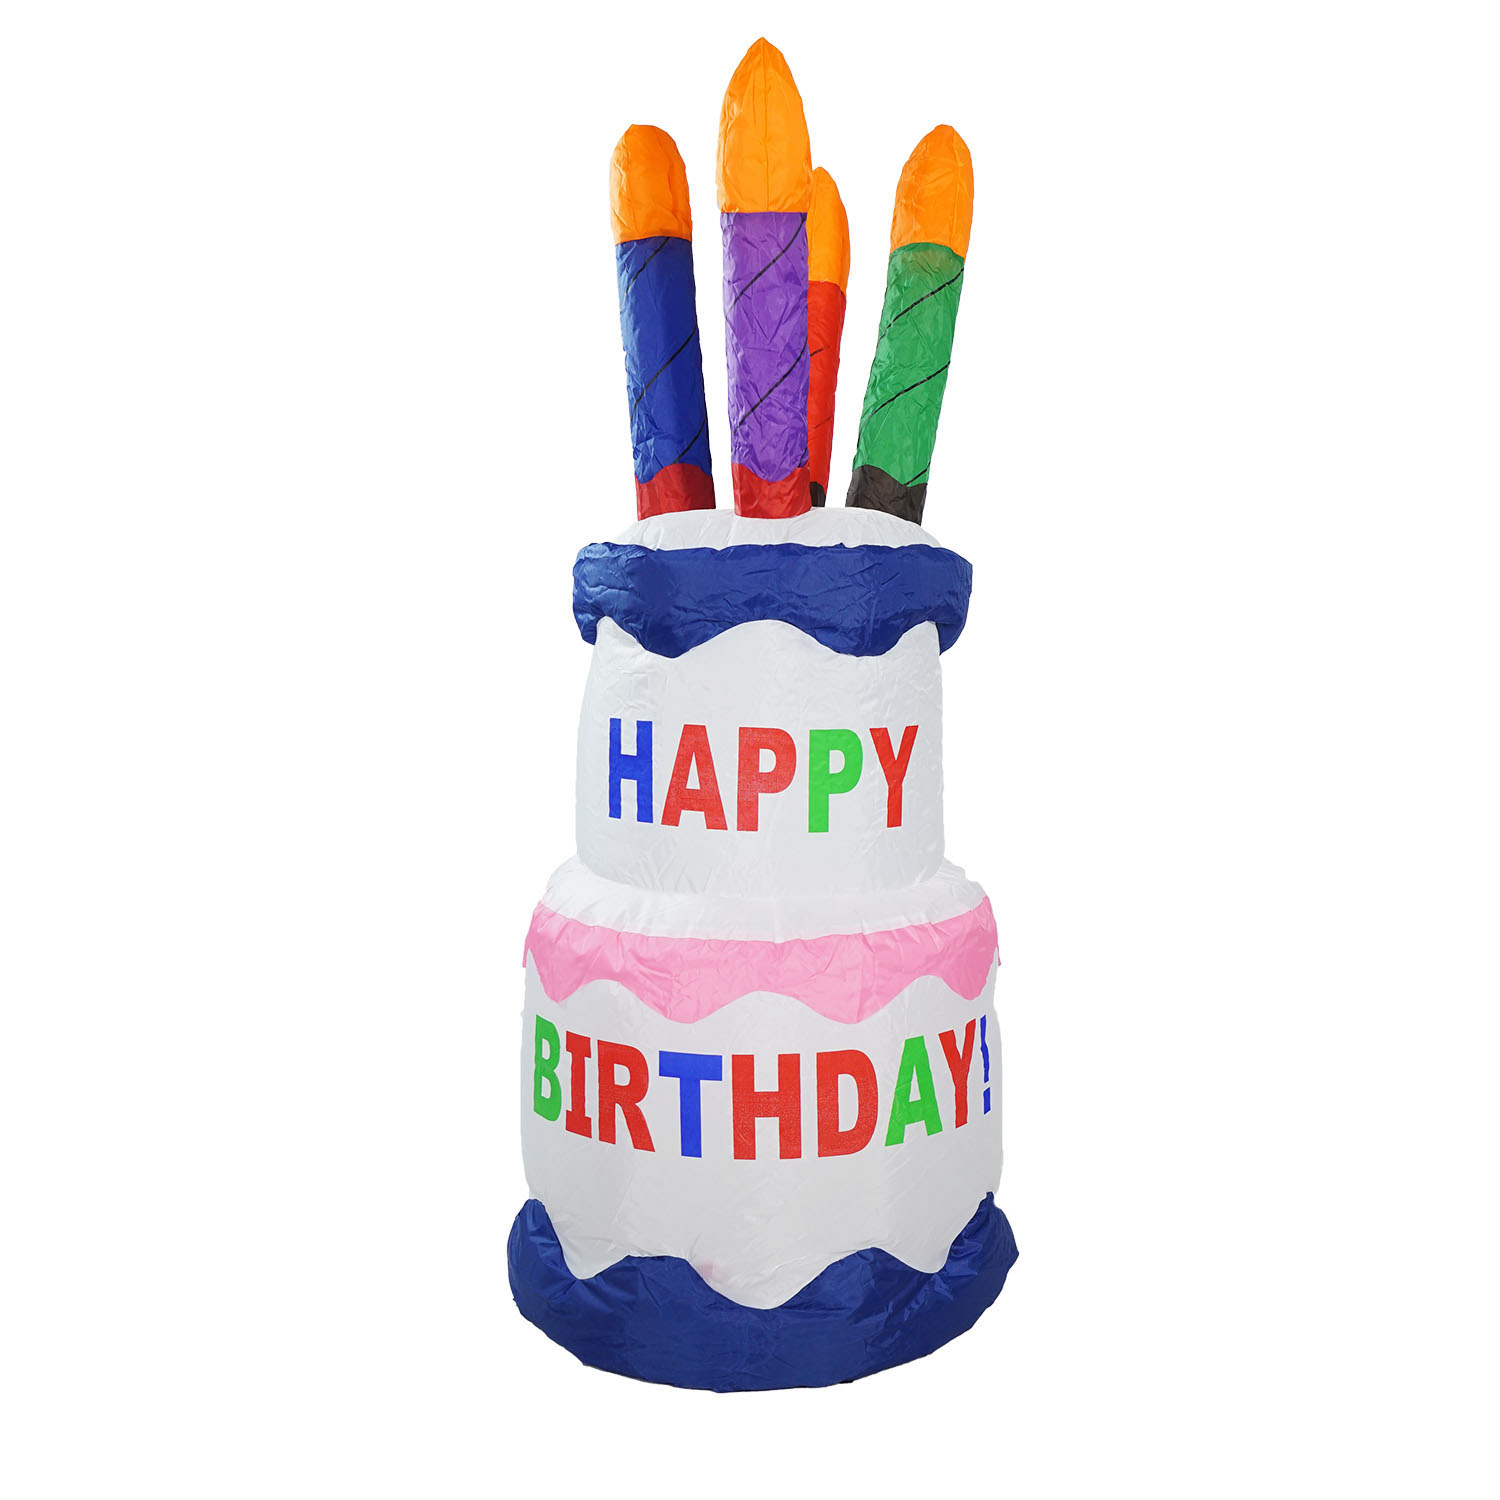 Northlight 4' Inflatable Lighted Happy Birthday Cake Outdoor Decoration - image 1 of 5